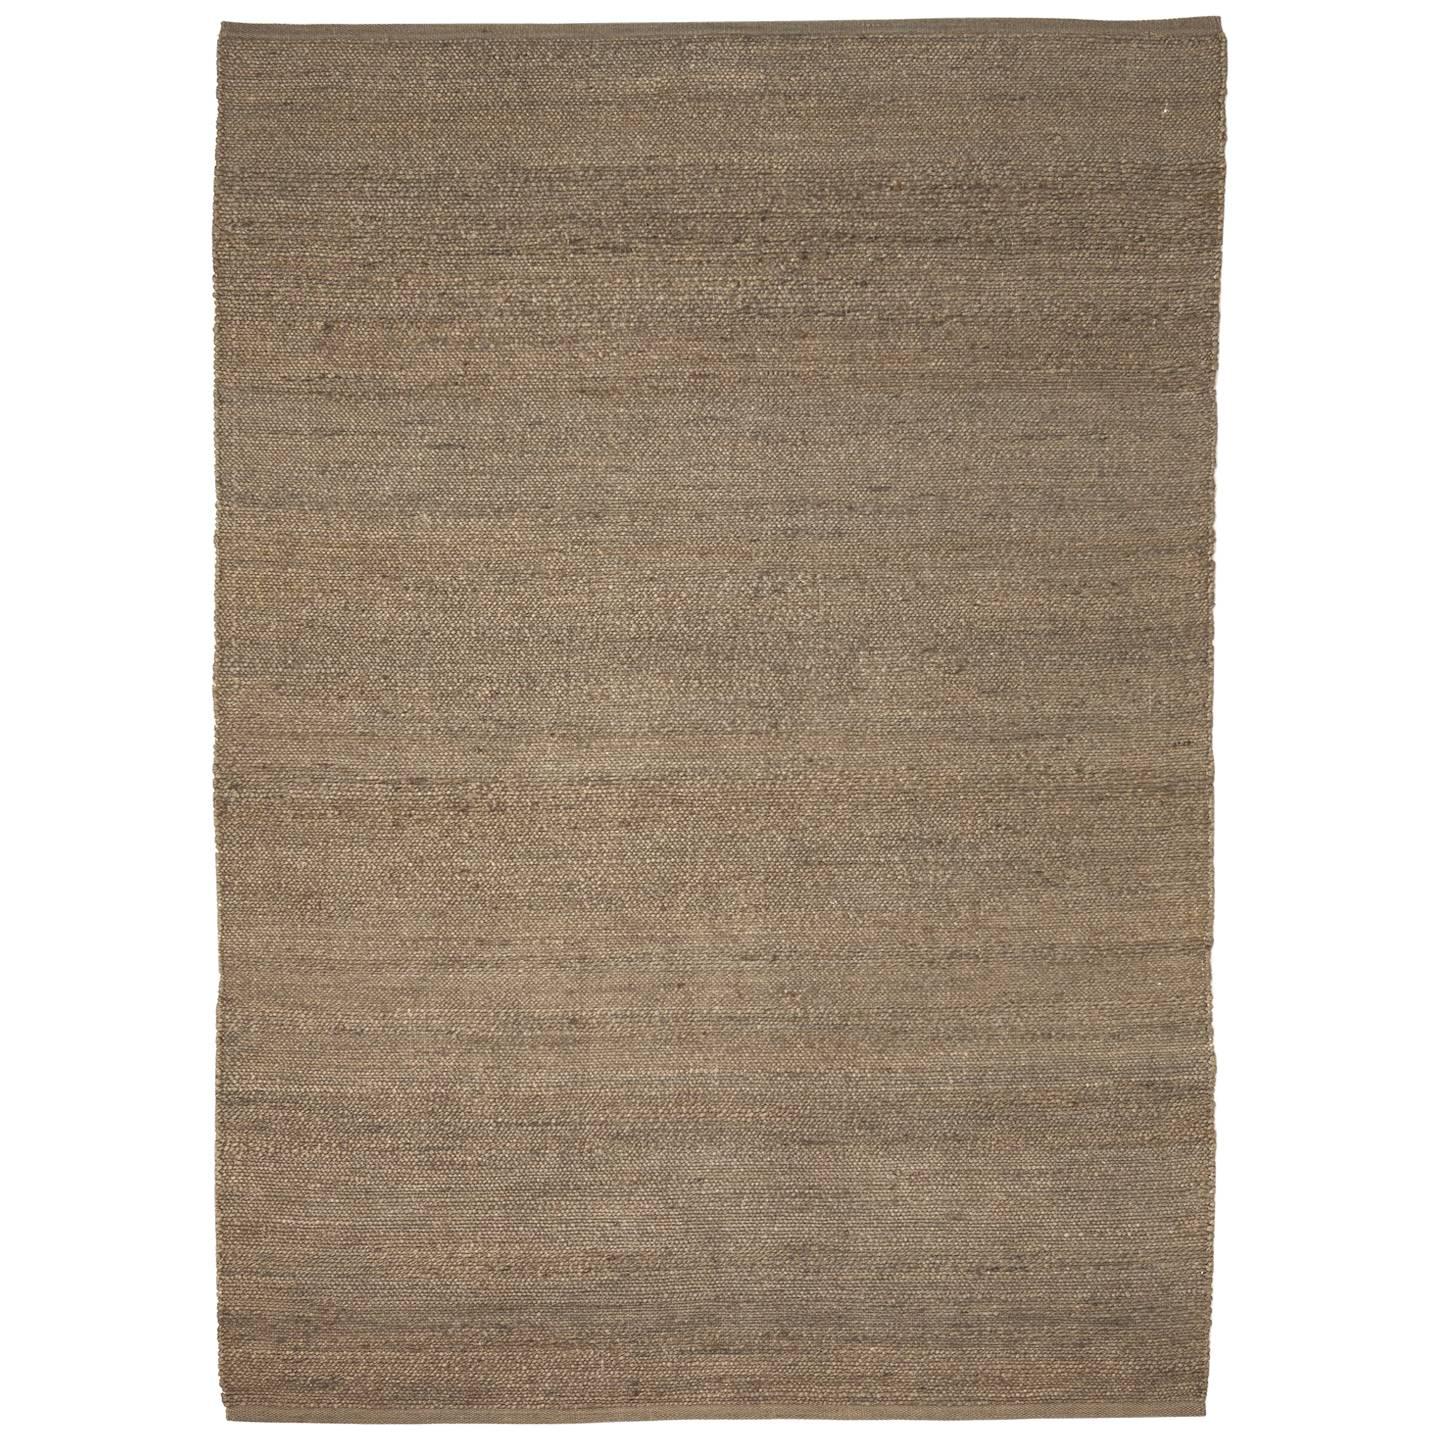 Hand-Loomed Herb Rug by Nani Marquina in Brown, Extra Large